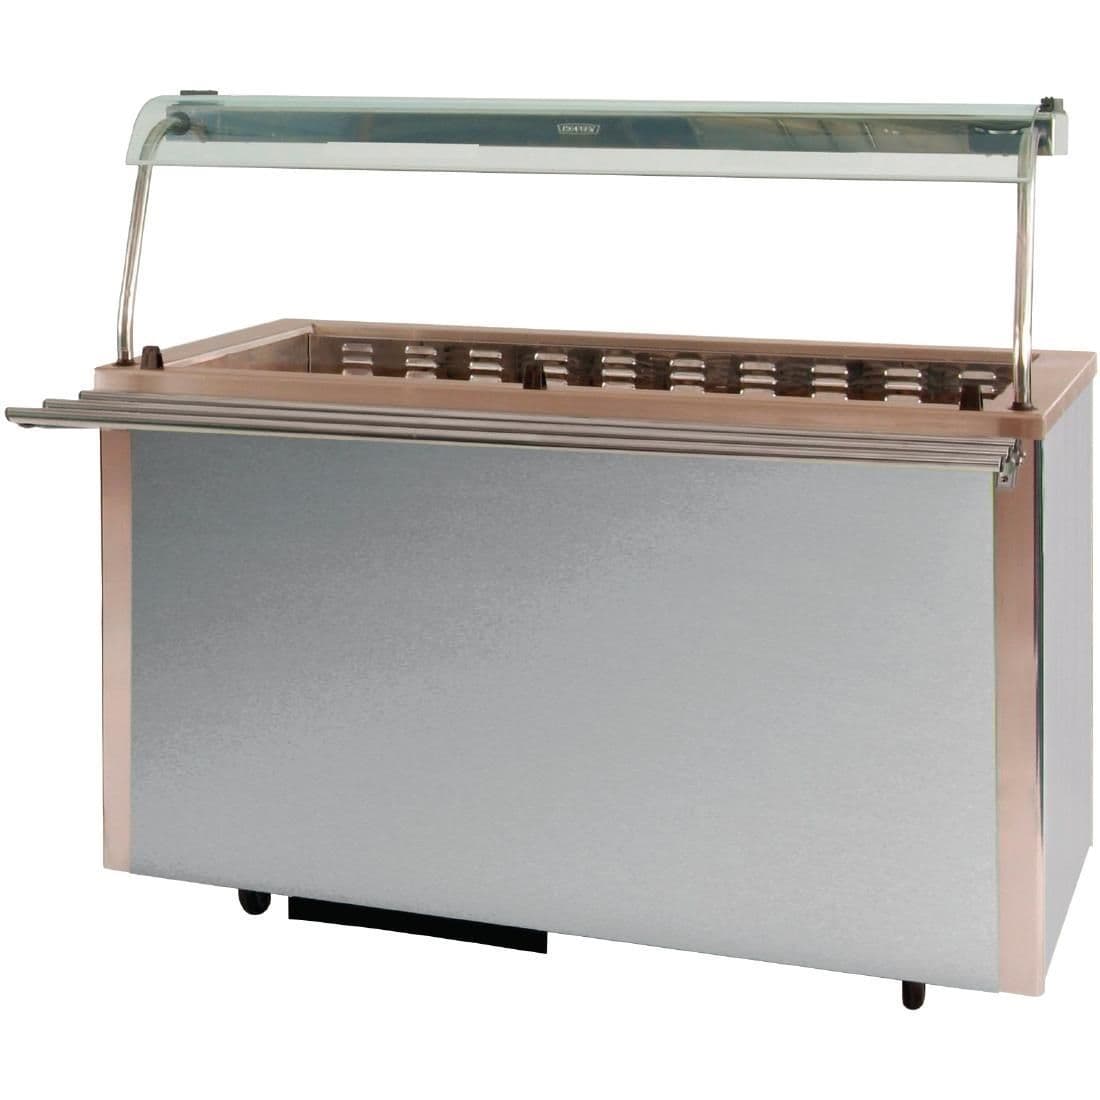 DR411 Moffat Versicarte Plus Cold Food Service Counter VCRW3 JD Catering Equipment Solutions Ltd